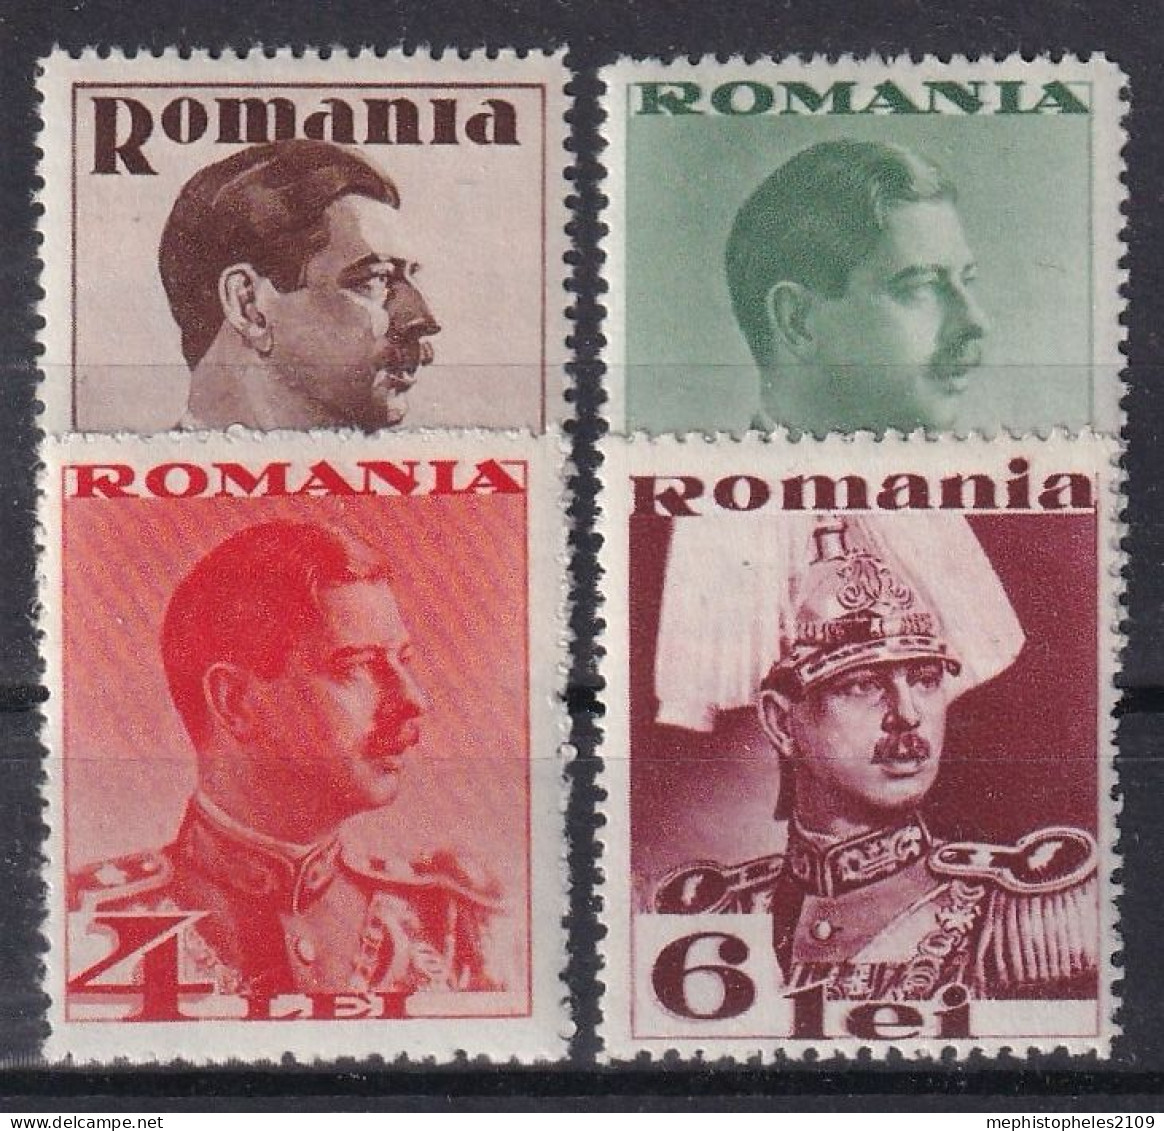 ROMANIA 1935 - Canceled - Sc# 447, 449, 451, 453 - Used Stamps